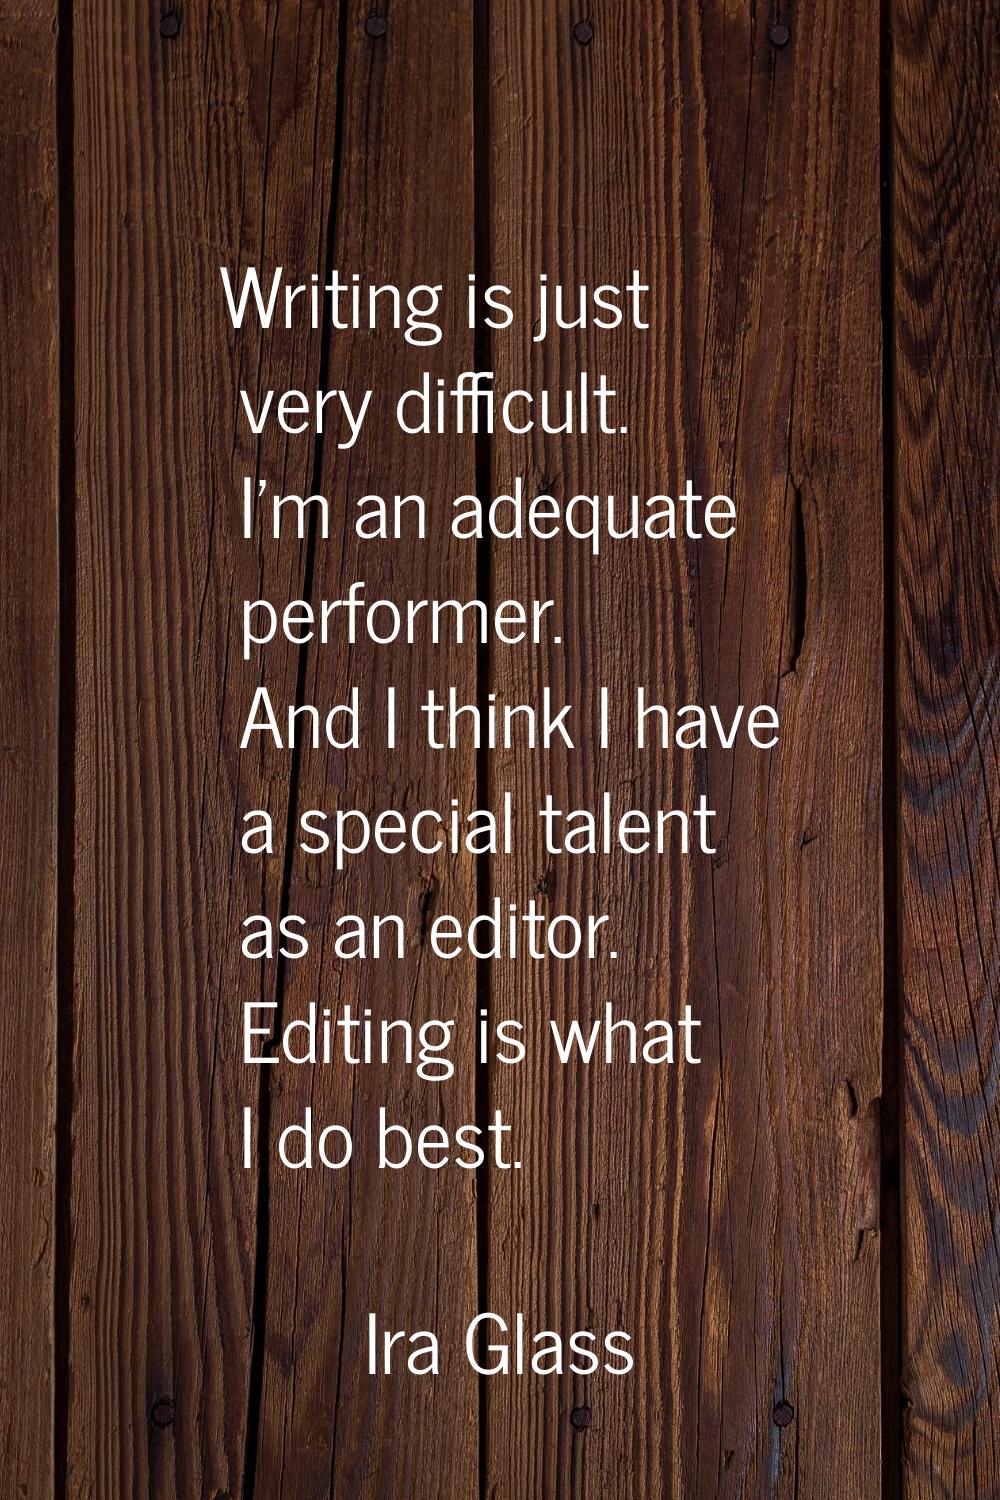 Writing is just very difficult. I'm an adequate performer. And I think I have a special talent as a